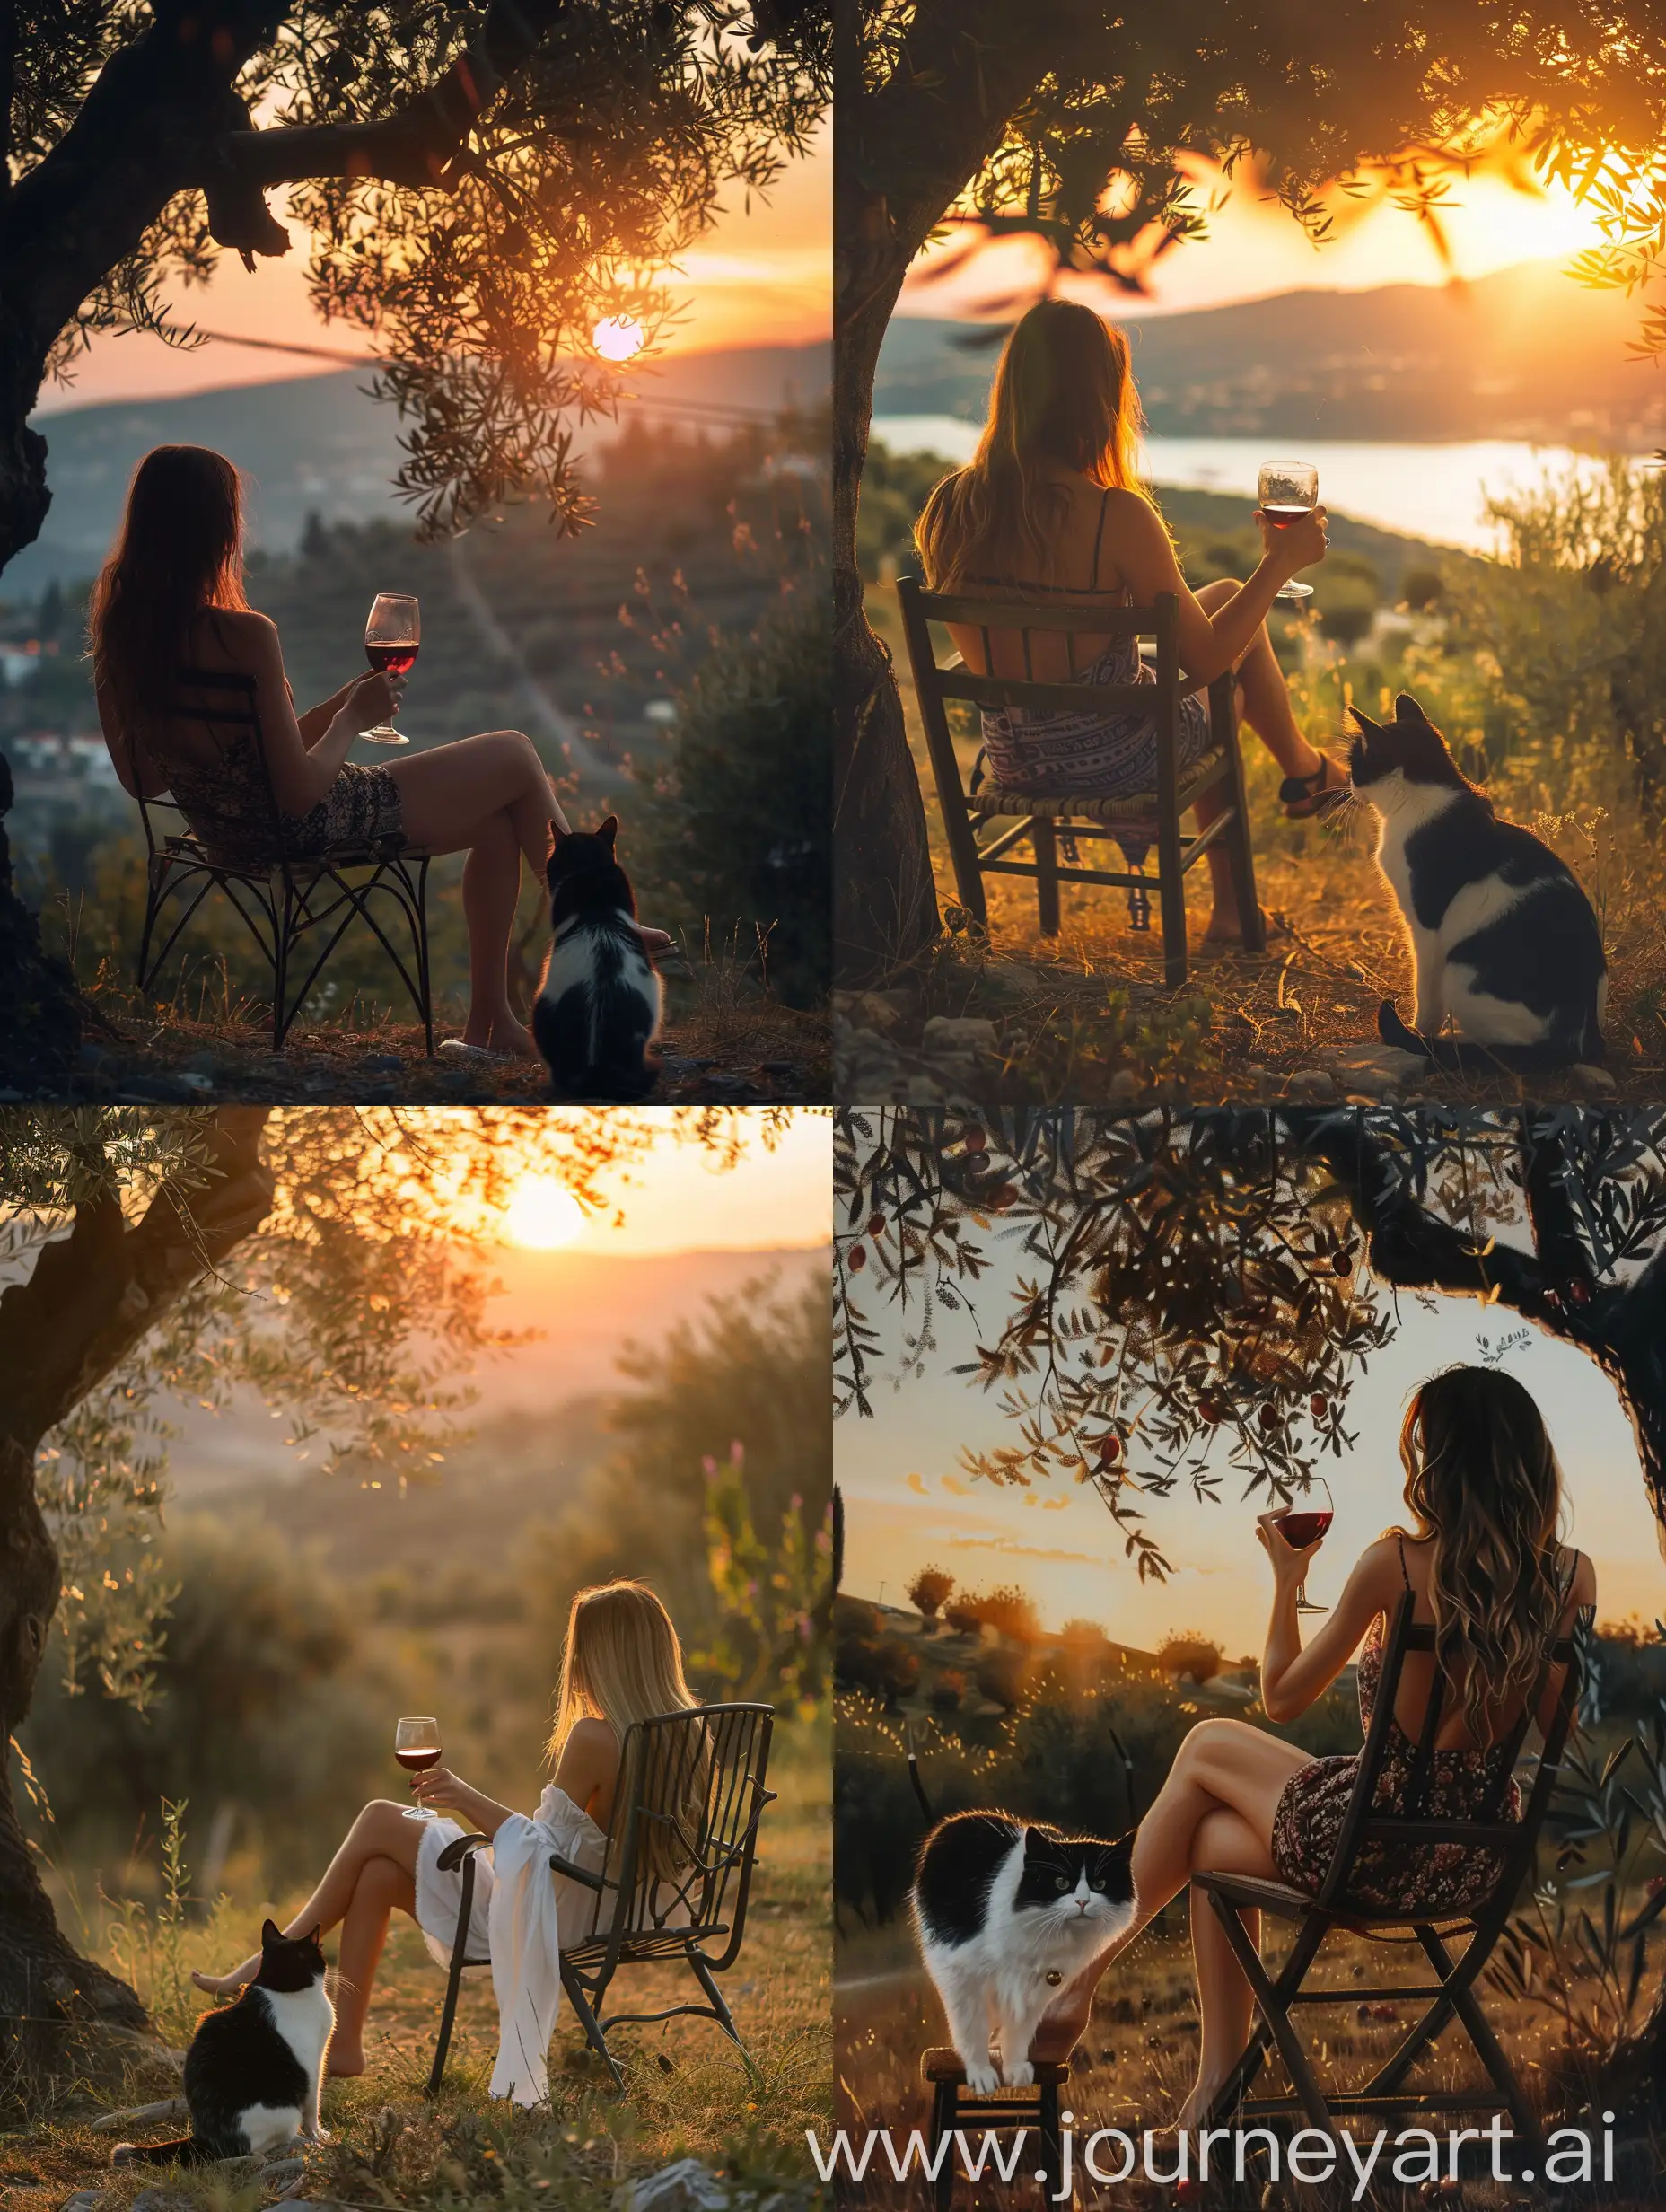 Young beautiful woman sitting on a chair under the olive tree drinking red wine and watching sunset with a black and white cat